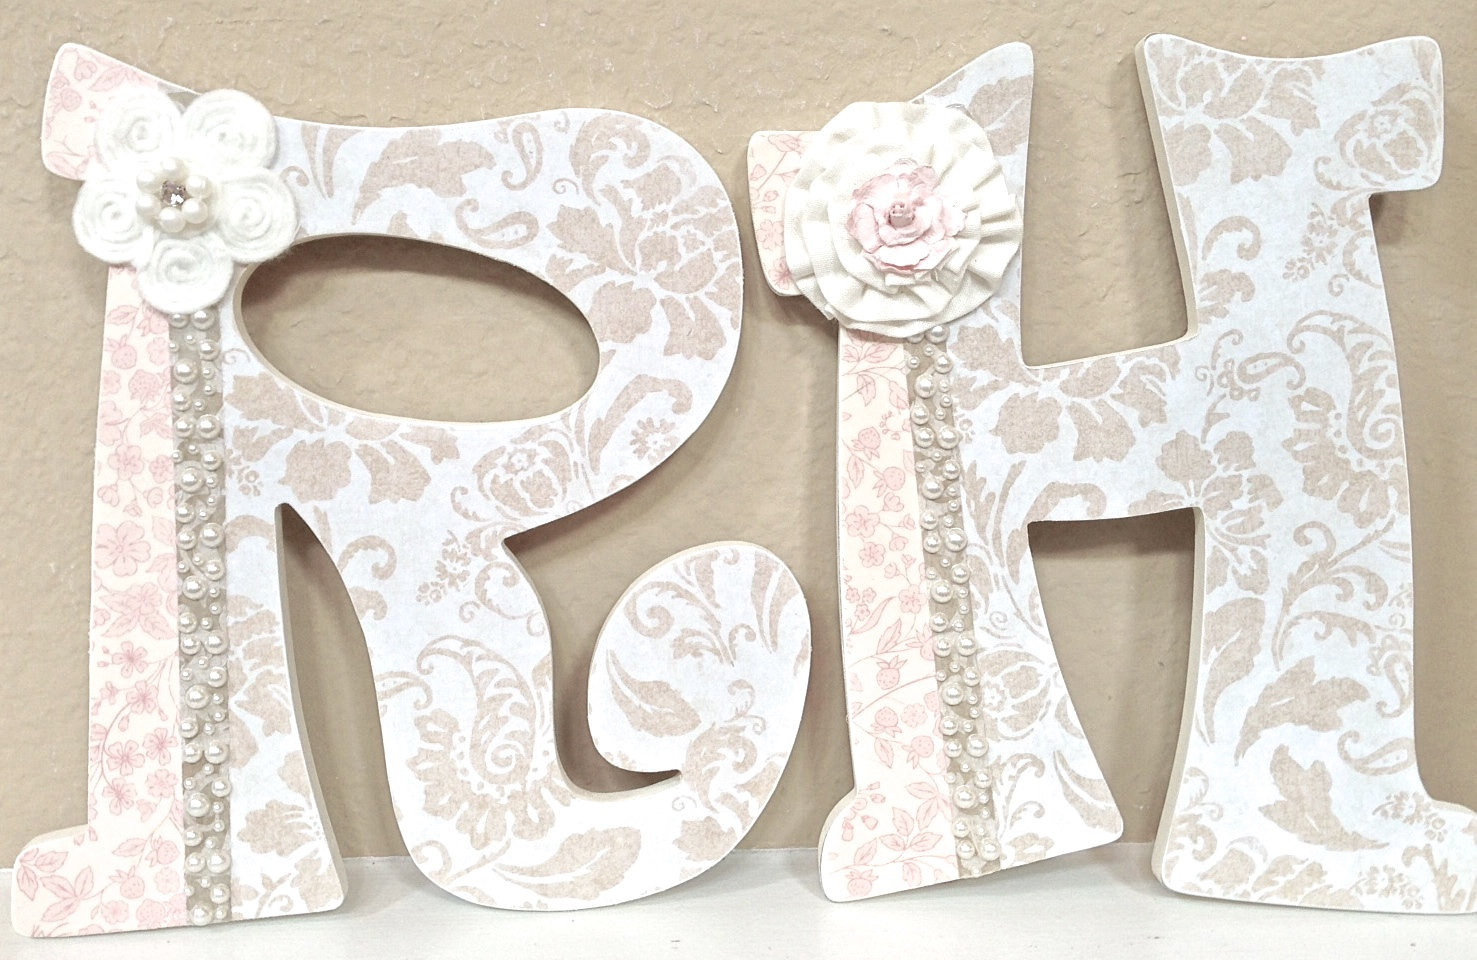 Baby Name Letters Room Decor
 Nursery letters baby name art custom nursery room decor any